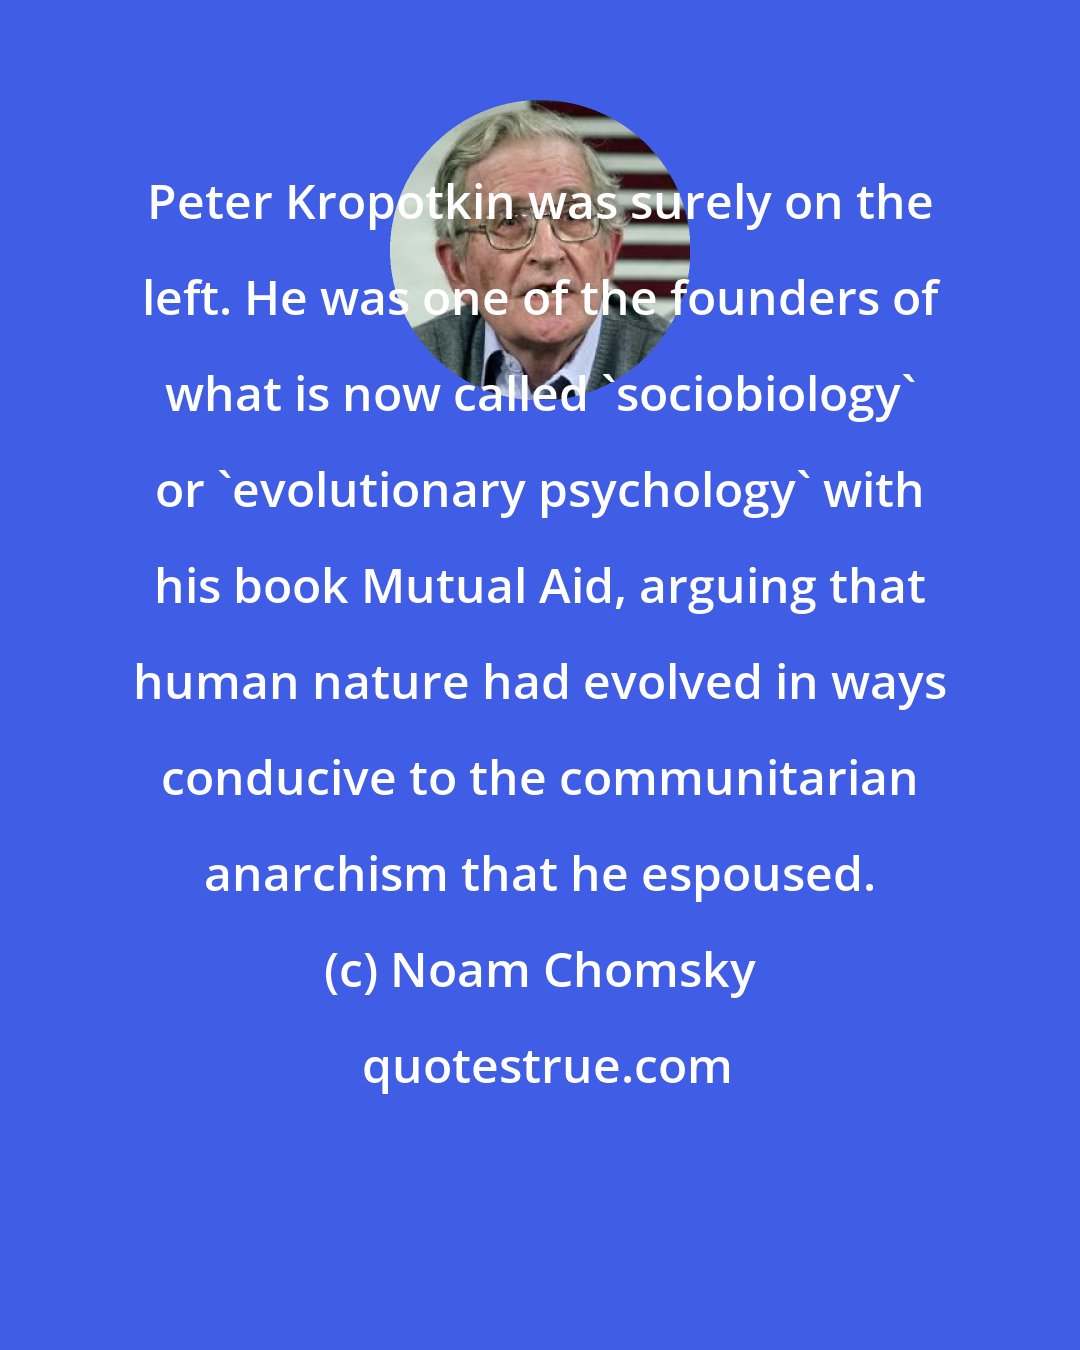 Noam Chomsky: Peter Kropotkin was surely on the left. He was one of the founders of what is now called 'sociobiology' or 'evolutionary psychology' with his book Mutual Aid, arguing that human nature had evolved in ways conducive to the communitarian anarchism that he espoused.